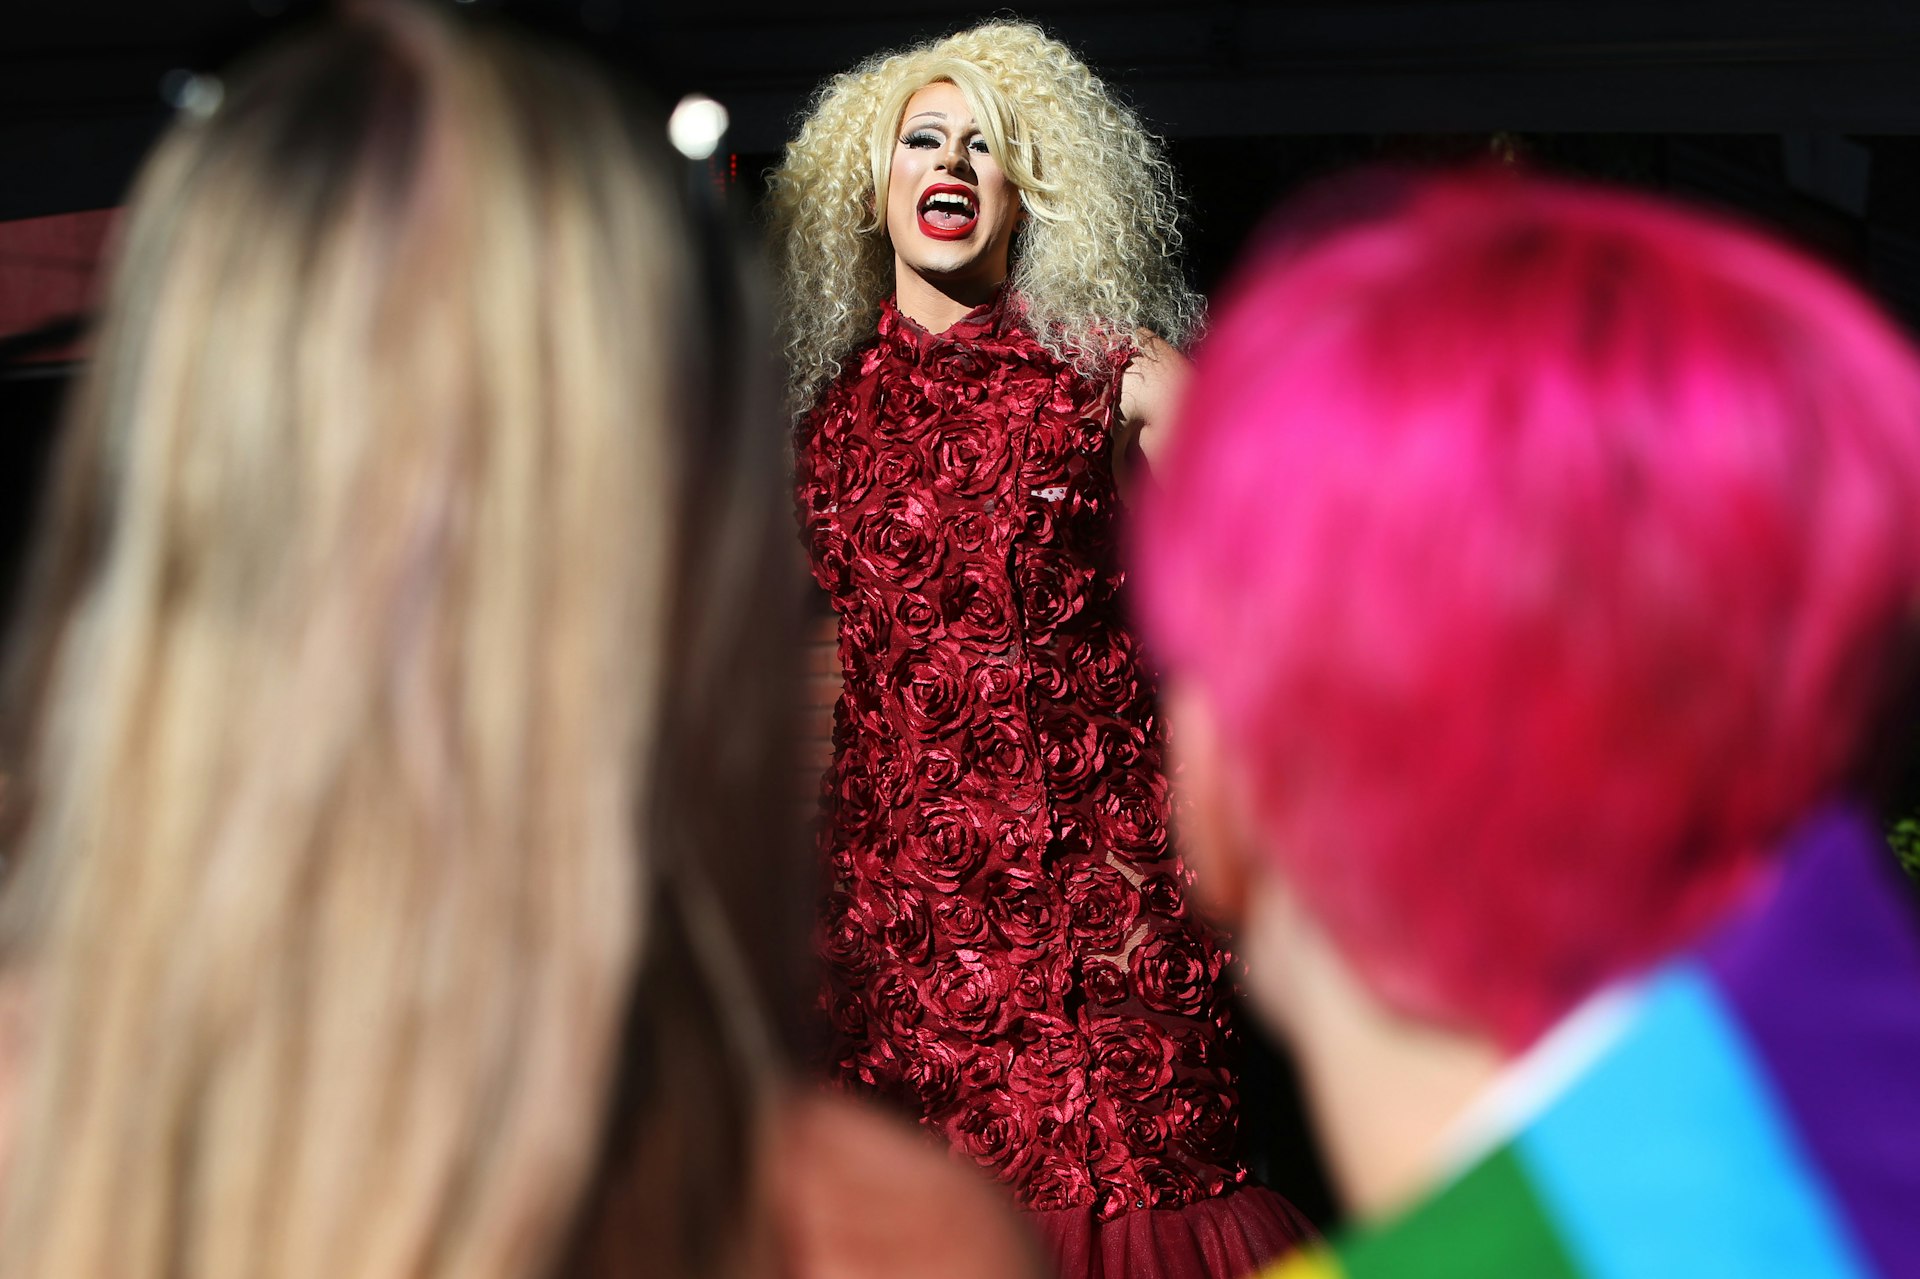 A man in drag performs for a crowd at a drag show during a Seattle PrideFest event in Capitol Hill, Seattle